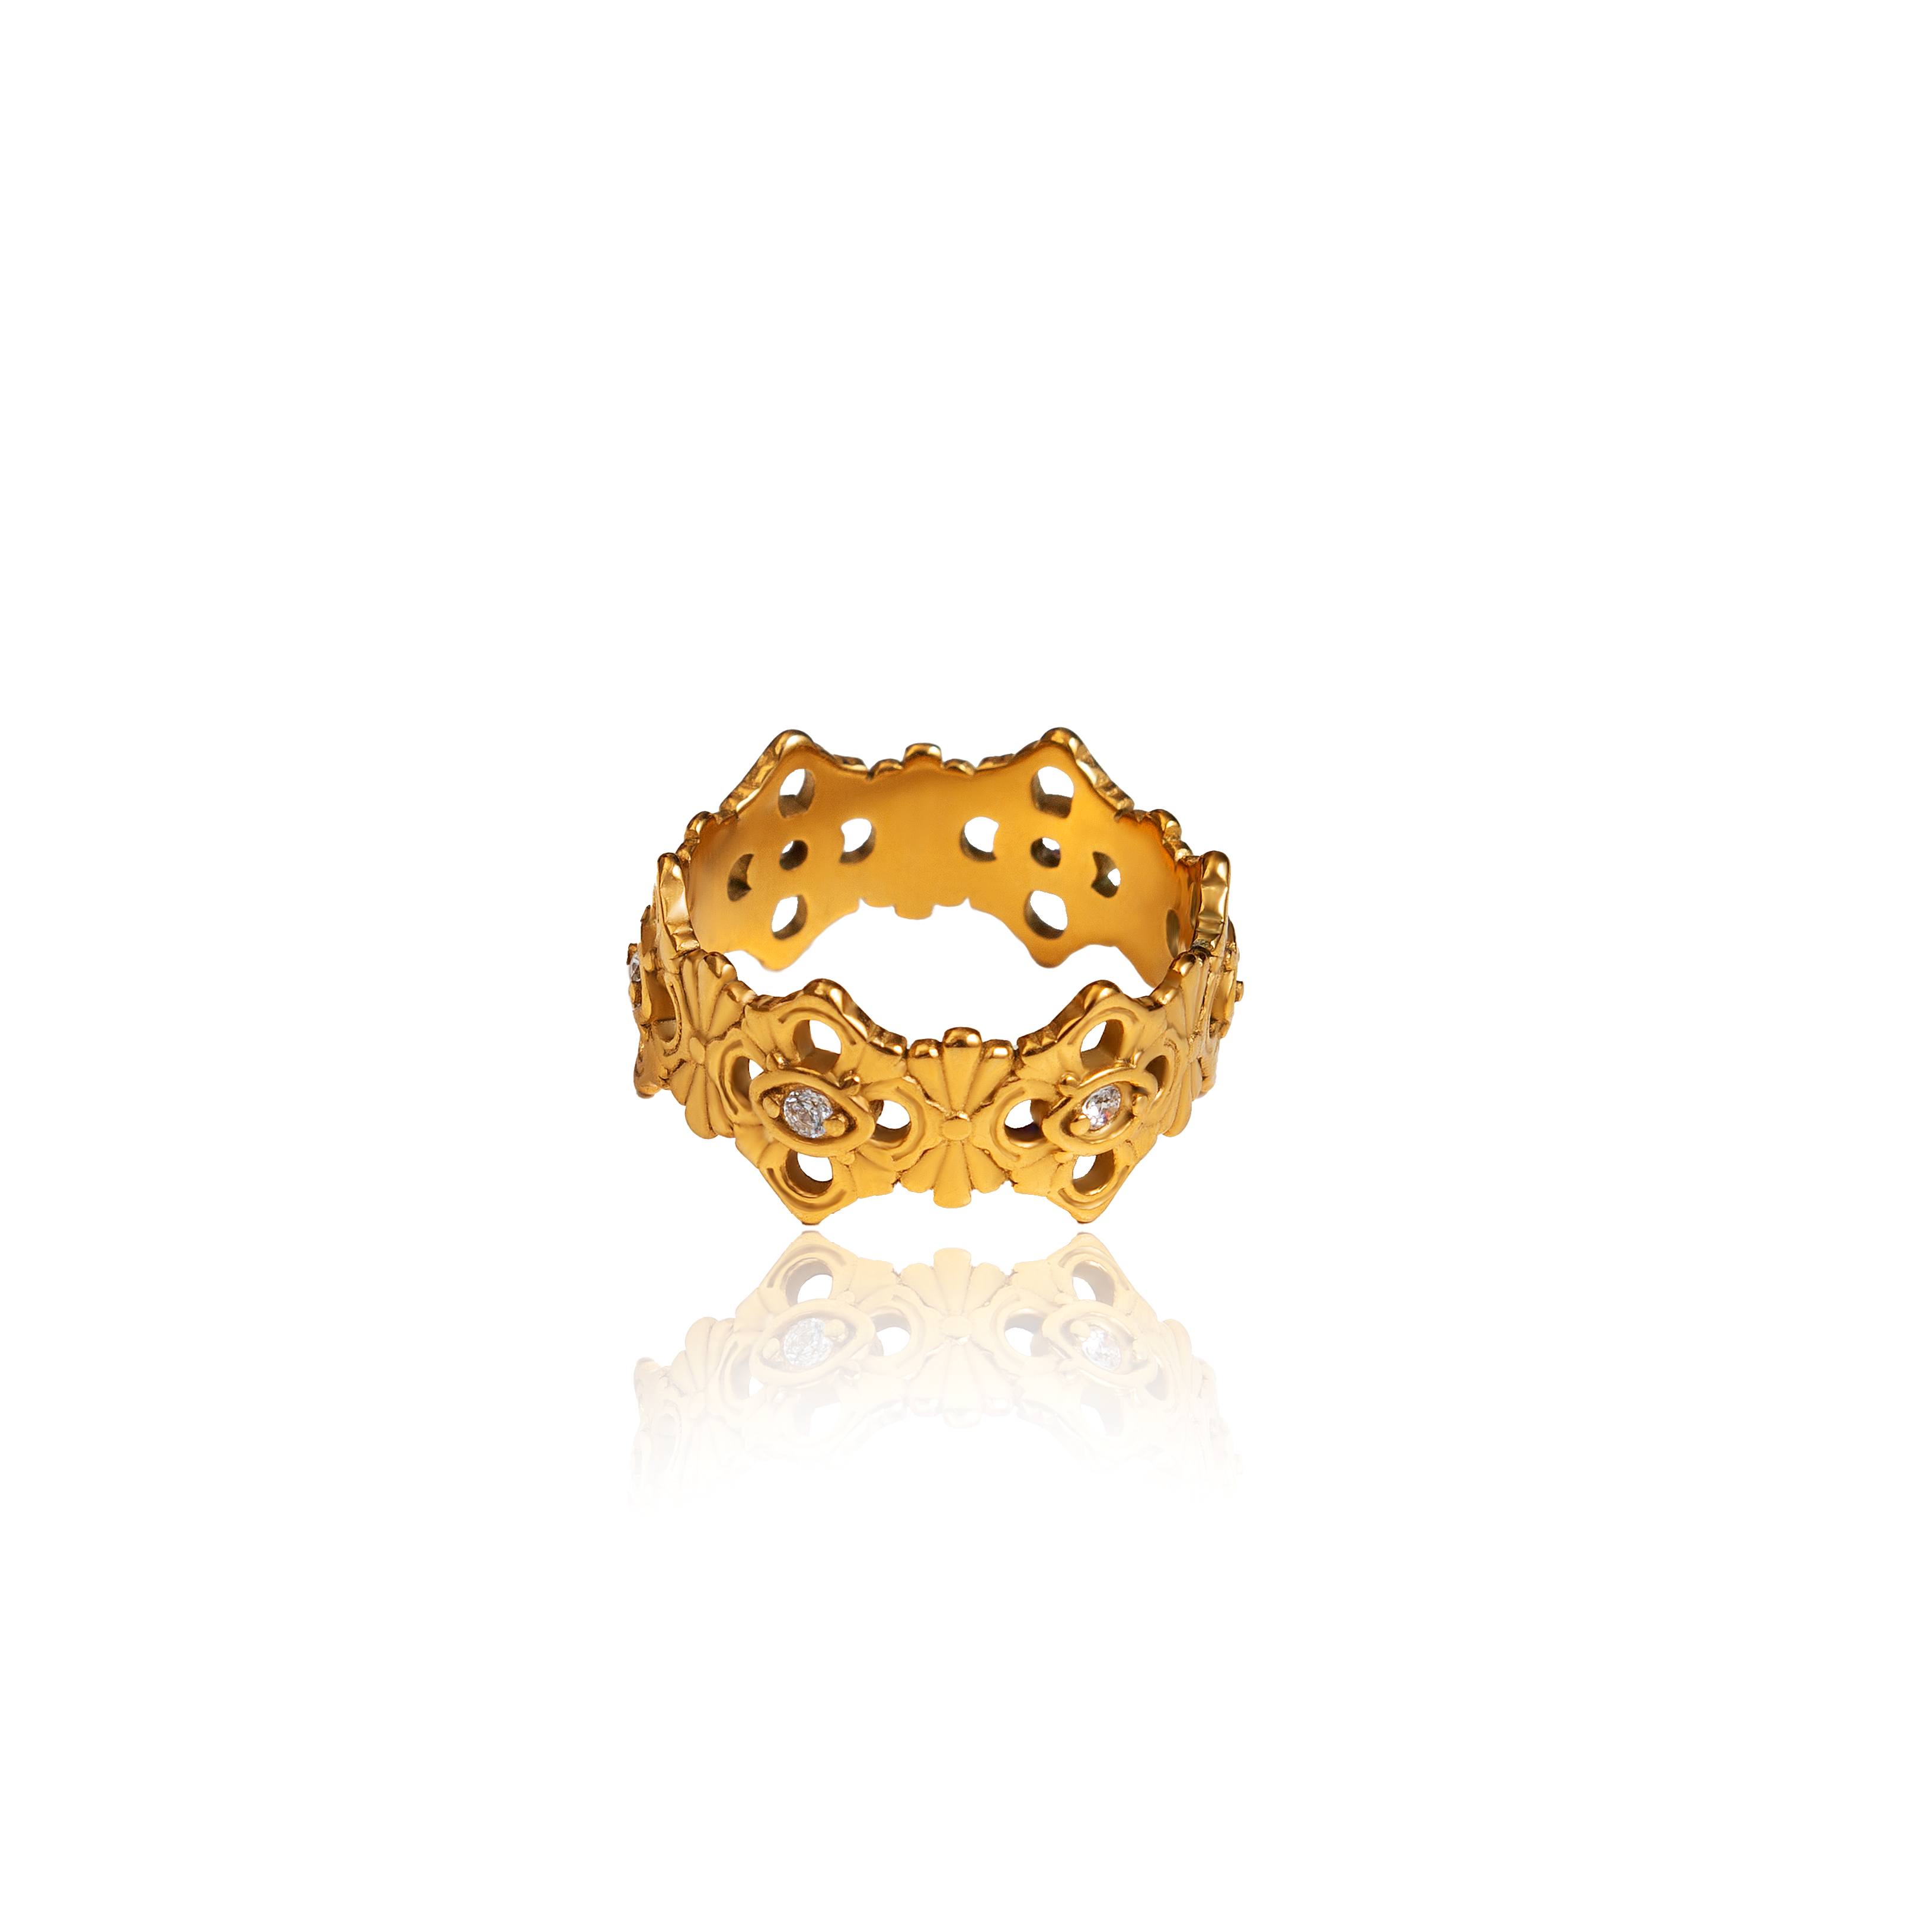 A vintage inspired design is spotted with small stones for a hint of sparkle, making this ring the perfect piece for your wardrobe.  18k gold plated on stainless steel. Available in size 6, 7, 8